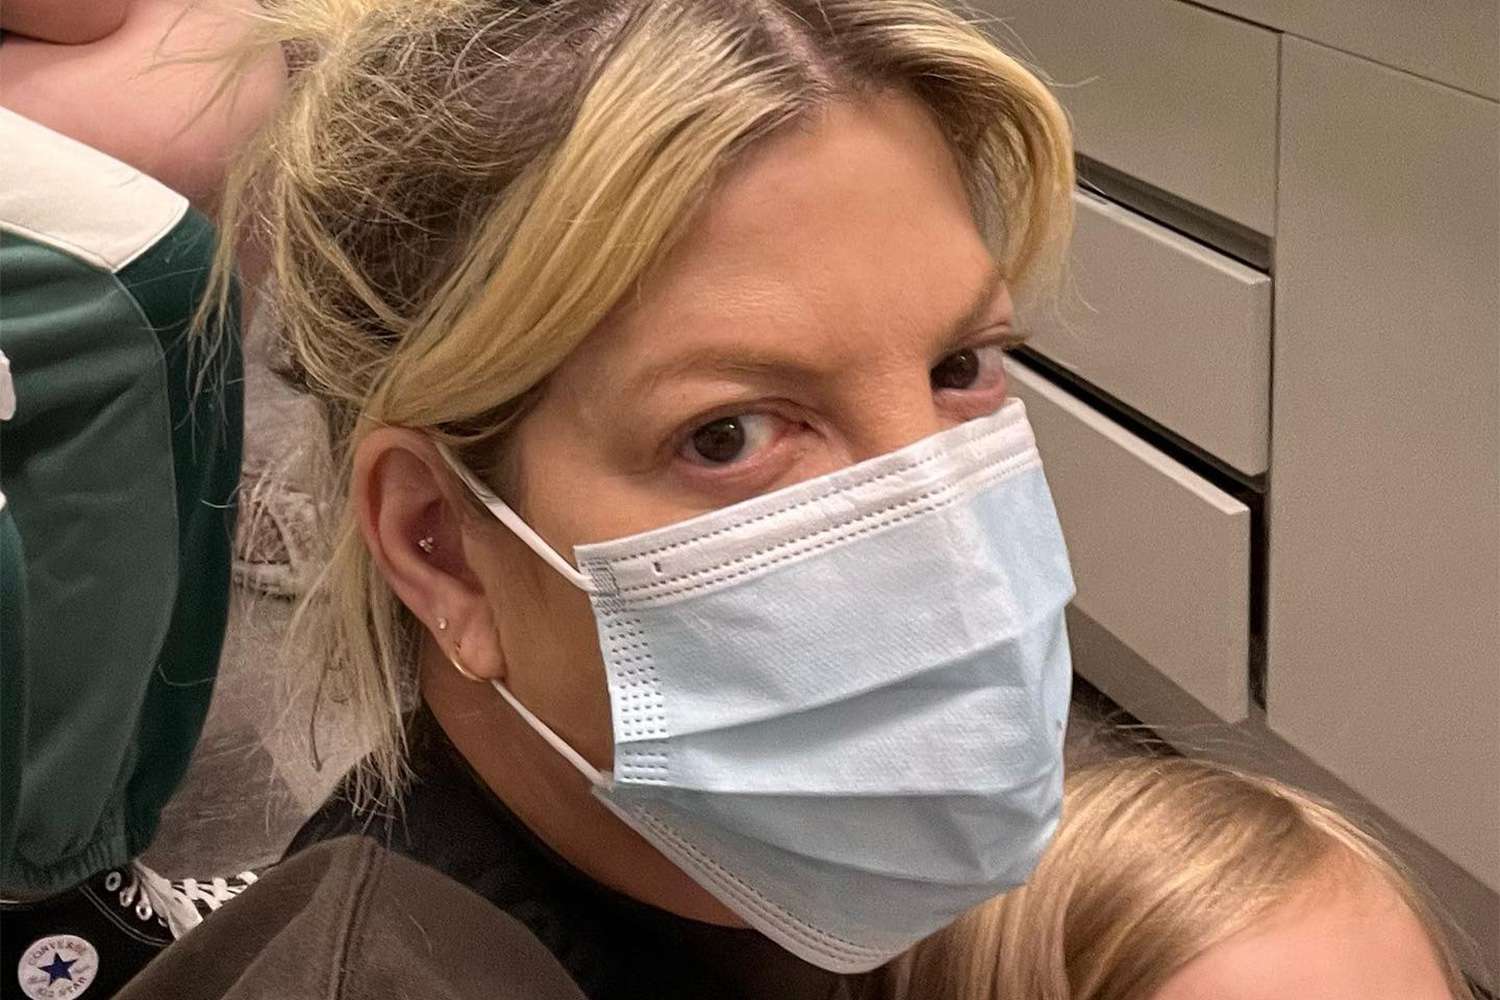 https://www.instagram.com/p/CsFJnJPvaj8/?igshid=MzRlODBiNWFlZA%3D%3D Verified • Urgent Care Center torispelling's profile picture Verified Let’s talk about MOLD… - Here we are again at Urgent Care. We’ve all been on this continual spiral of sickness for months. Sick. Get better. To get sick again. Used to think… well that’s what happens when you have young kids in school. They just continually bring sicknesses home. But, when it gets to the point where they are at home sick more than being in school we had to reassess what was going on. Kids will be kids but when you have your youngest (10 and 6) so sick they are sleeping all day and say they feel dizzy even standing I knew something bigger was going on. Enter Mold inspection! Thx to Sean at Pacific Scope Inspections who came out and discovered extreme mold in our home 😱. The pieces all started to fall into place. Has anyone ever been thru Mold Infections? You just keep getting sick, one infection after another. Respiratory infections. Extreme allergy like symptoms too and like my poor Finn skin rashes as well. As we sit here today in Urgent Care … watching everyone getting swabbed and first up Finn with Strep throat ✅and high fever of 103. We now know that when the house was labeled a health hazard and not live able that wording was FACT. We now GET IT! It’s hard to just uproot a huge family especially in midst of all feeling so sick and in bed. But, we now will vacate the home asap. Looking for an @airbnb or @vrbo or hotel till we can even grasp what to do. We are just renters so looks like moving is in our eminent future as well. Grateful we have renters insurance. We’d be lost how to tackle this without. And, special non shout out to our public school district for repeatedly not believing our kids were as sick as they’ve been continually. Just get them in school right 😡? Has anyone been thru Mold sickness? The deeper dive I do online sadly I see how common this is 😢 #mold #moldinfection Edited · 21m